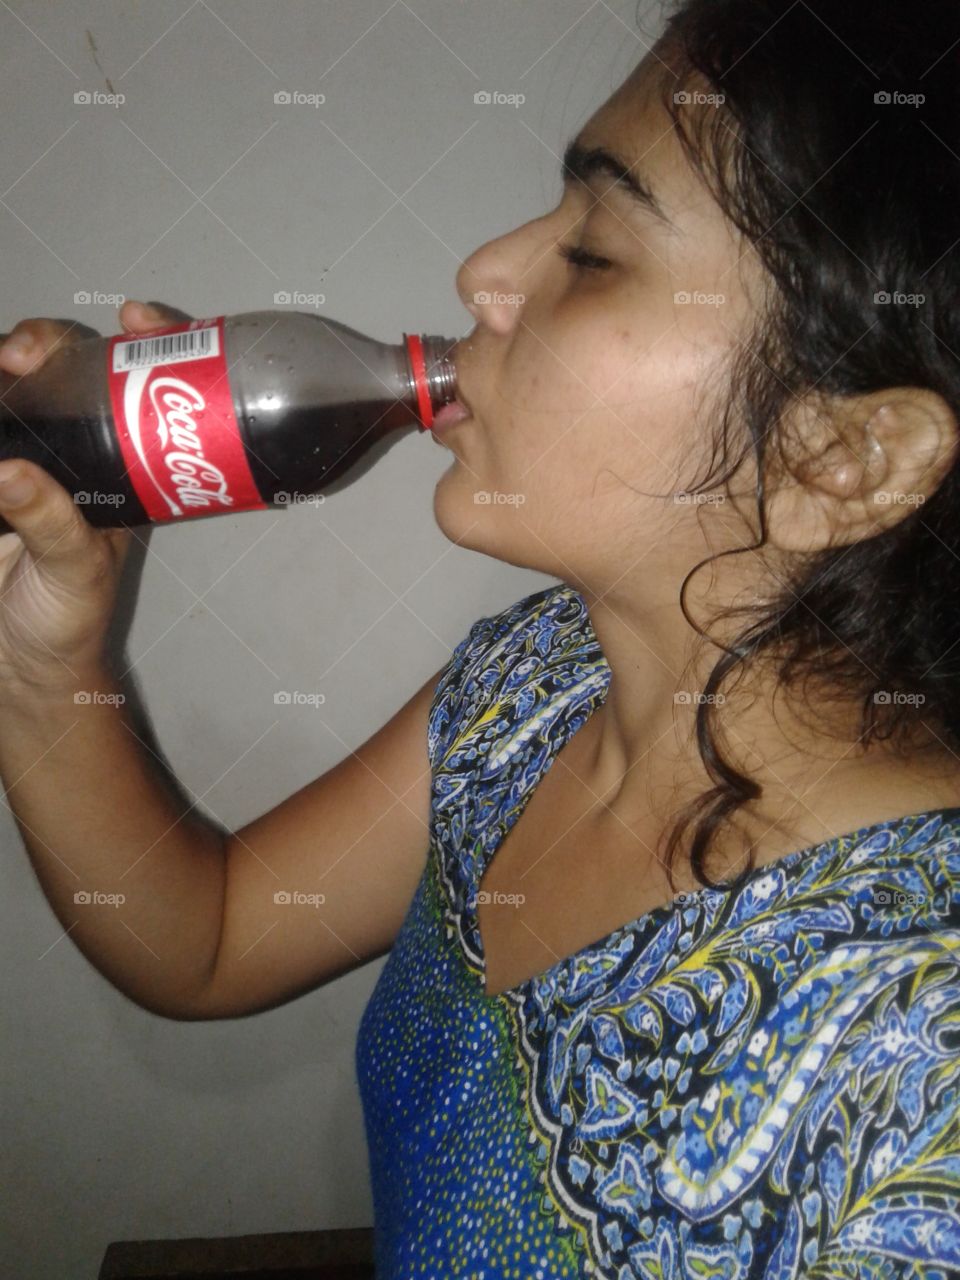 drinking coca cola with tried face